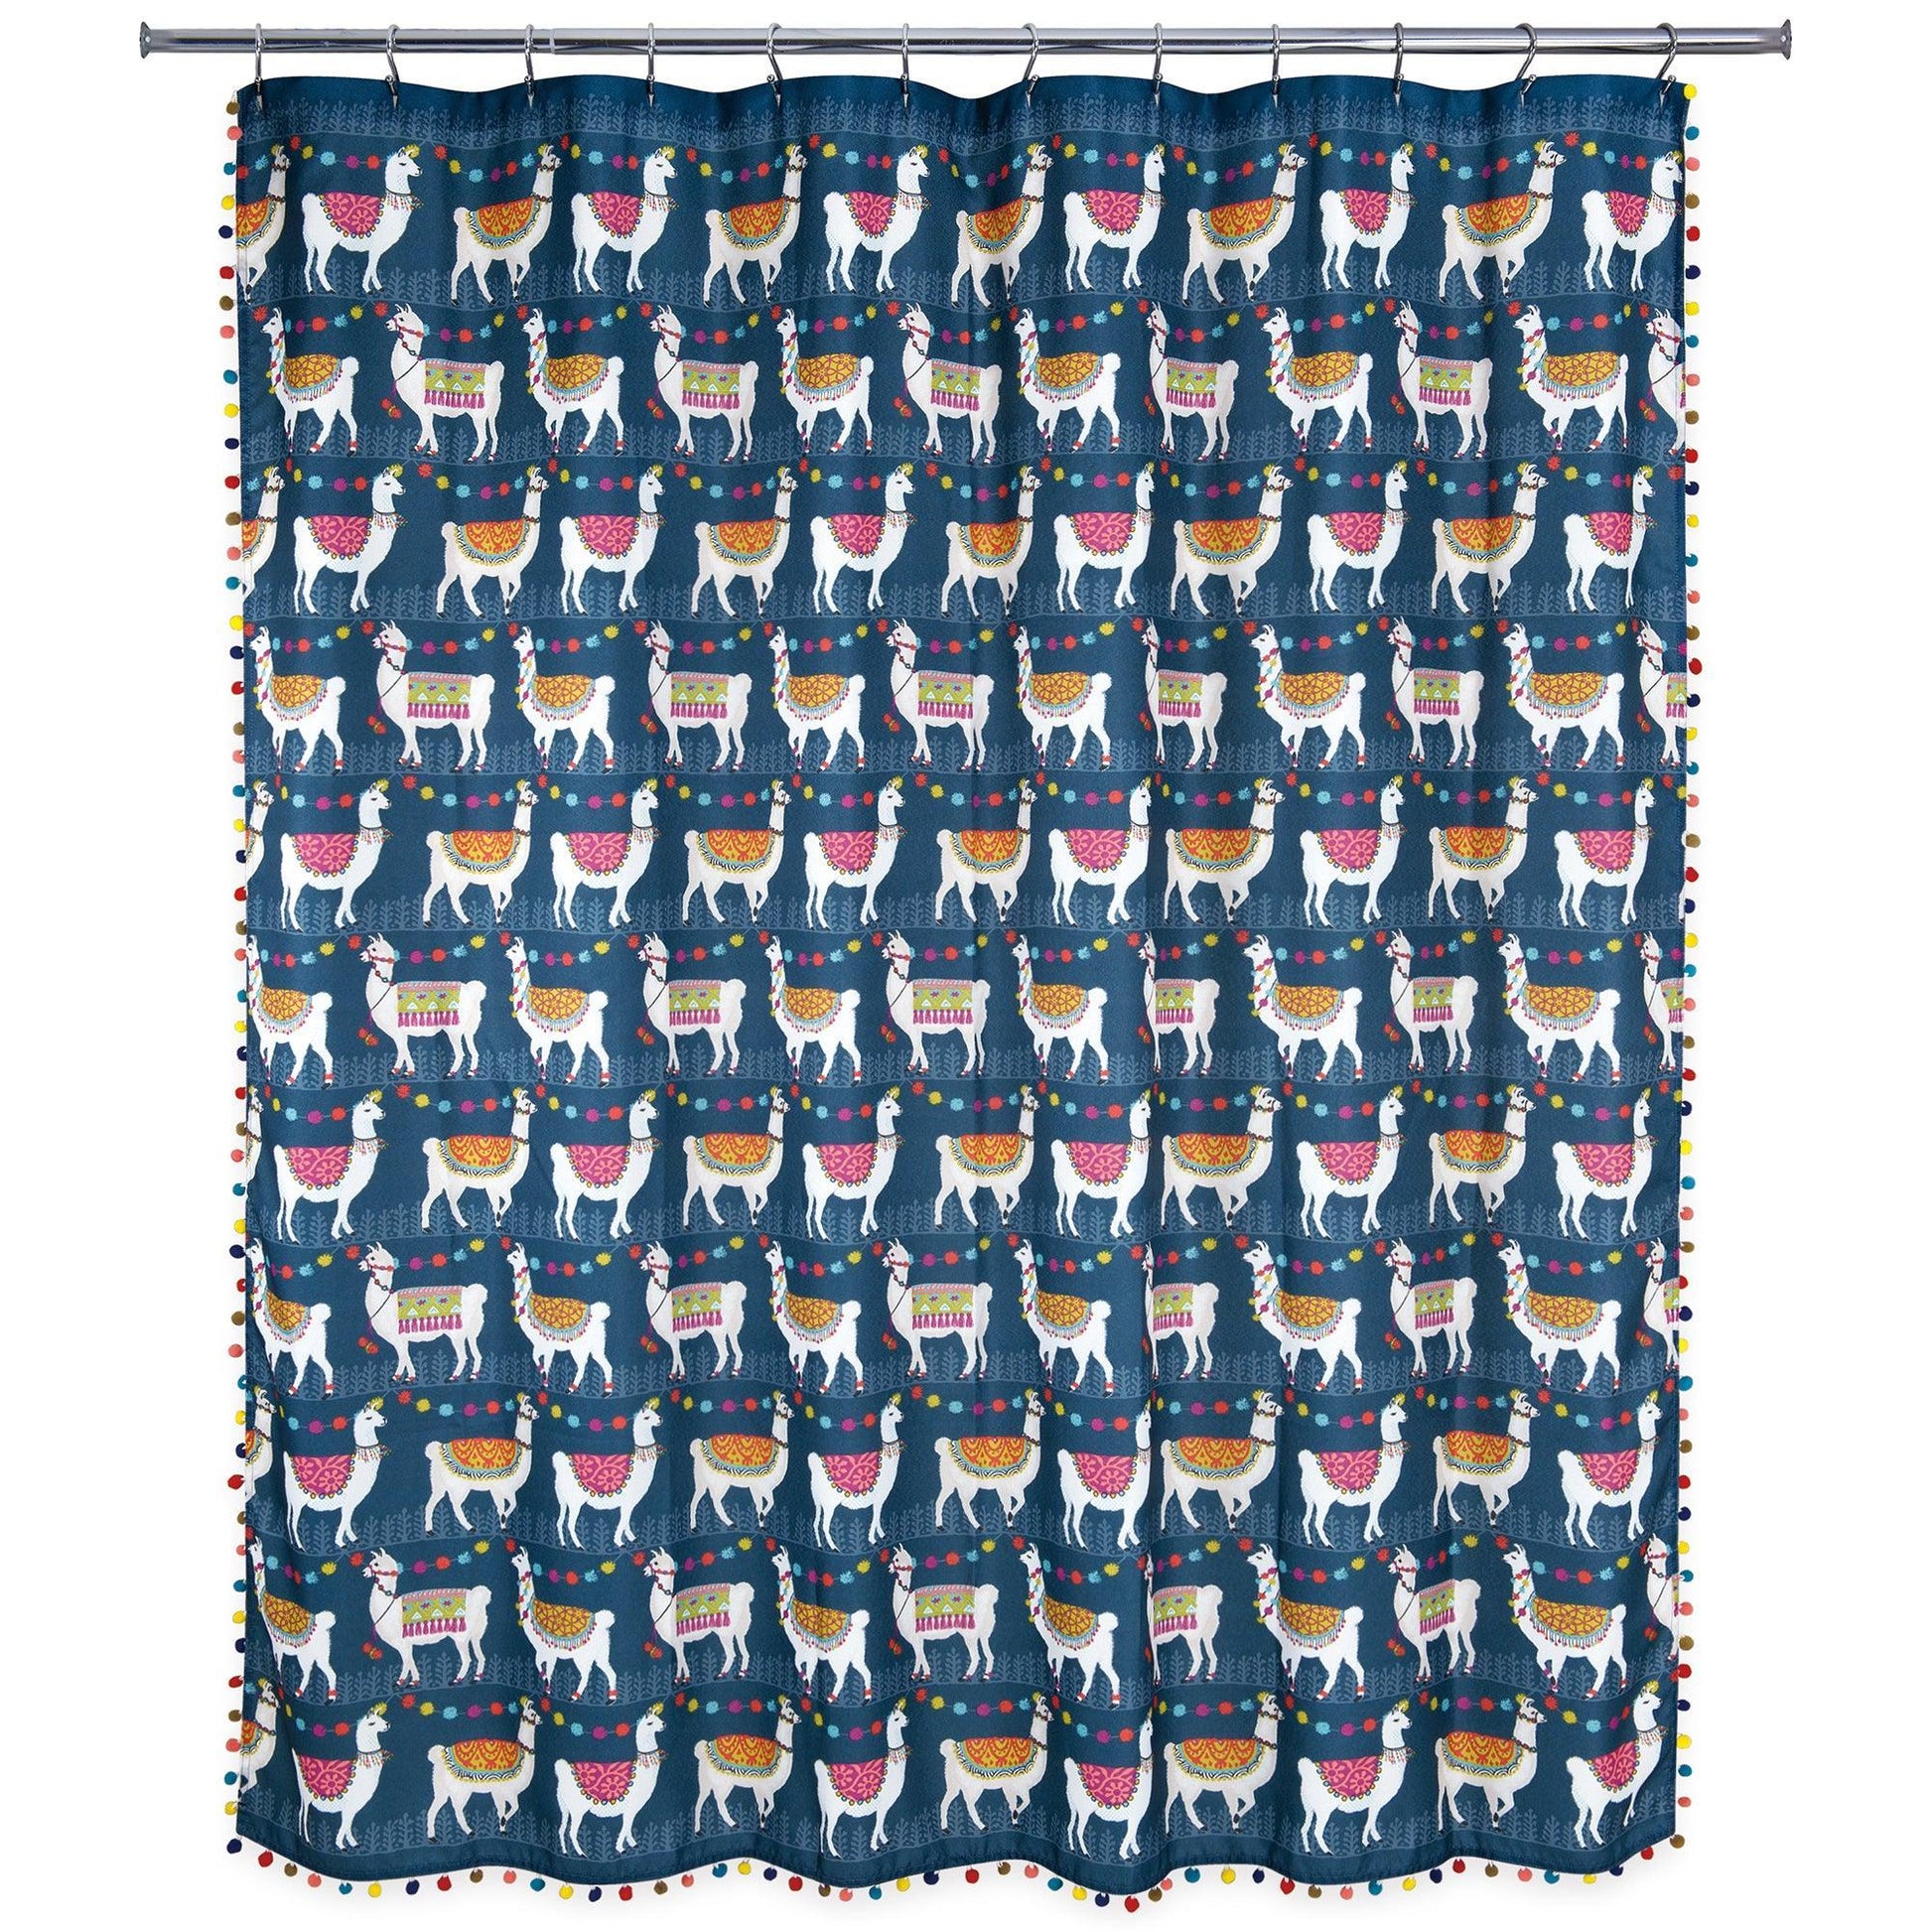 Llamas Shower Curtain With Navy Pom Poms - Allure Home Creation